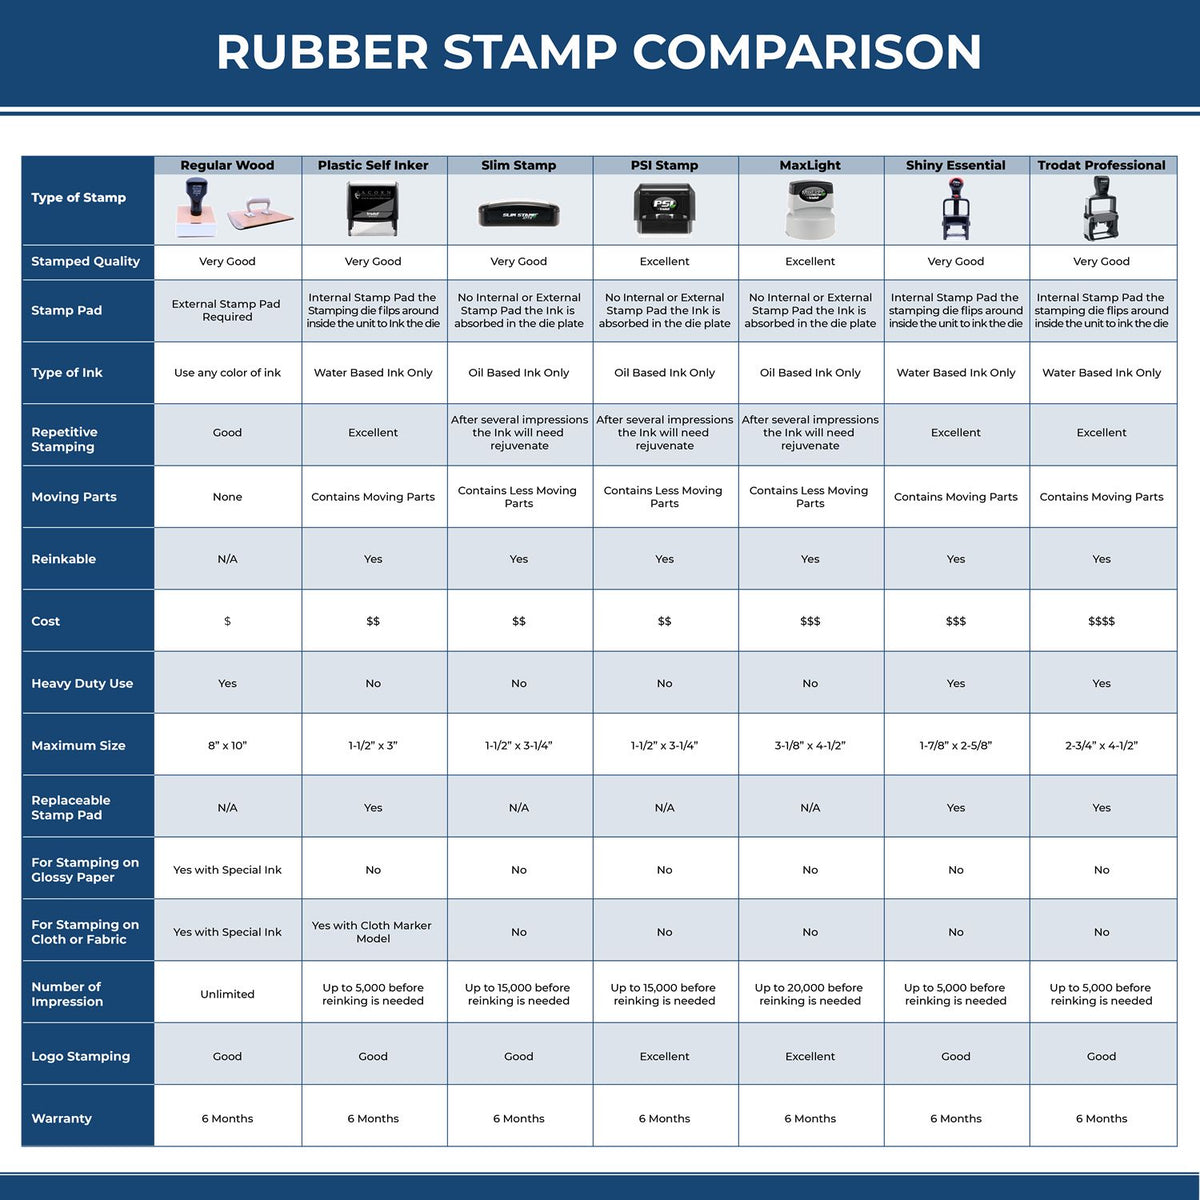 A comparison chart for the different types of mount models available for the Super Slim North Carolina Notary Public Stamp.